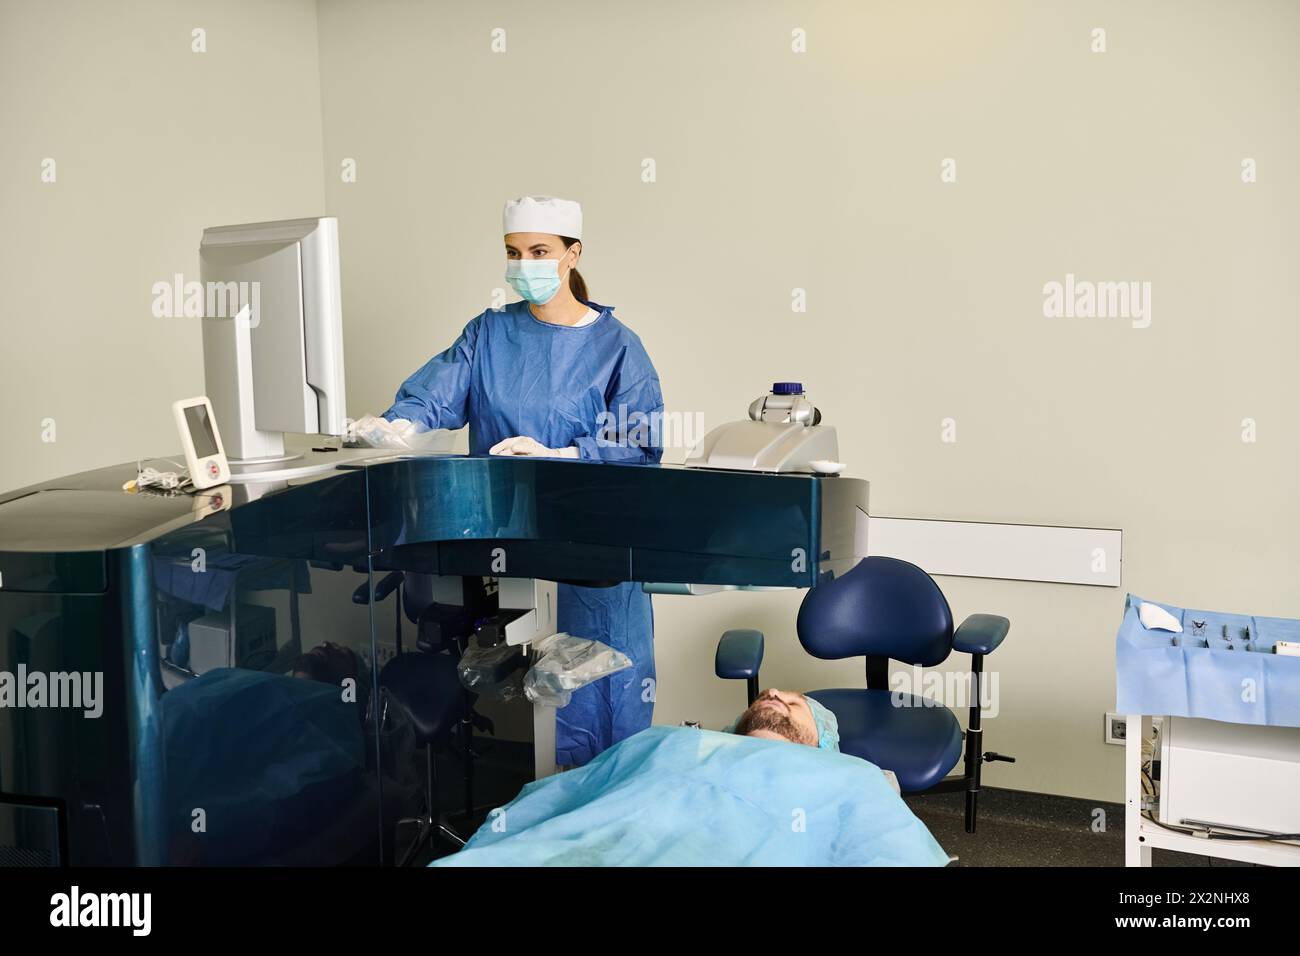 A person in scrubs lays on a hospital bed, tired yet resolute. Stock Photo